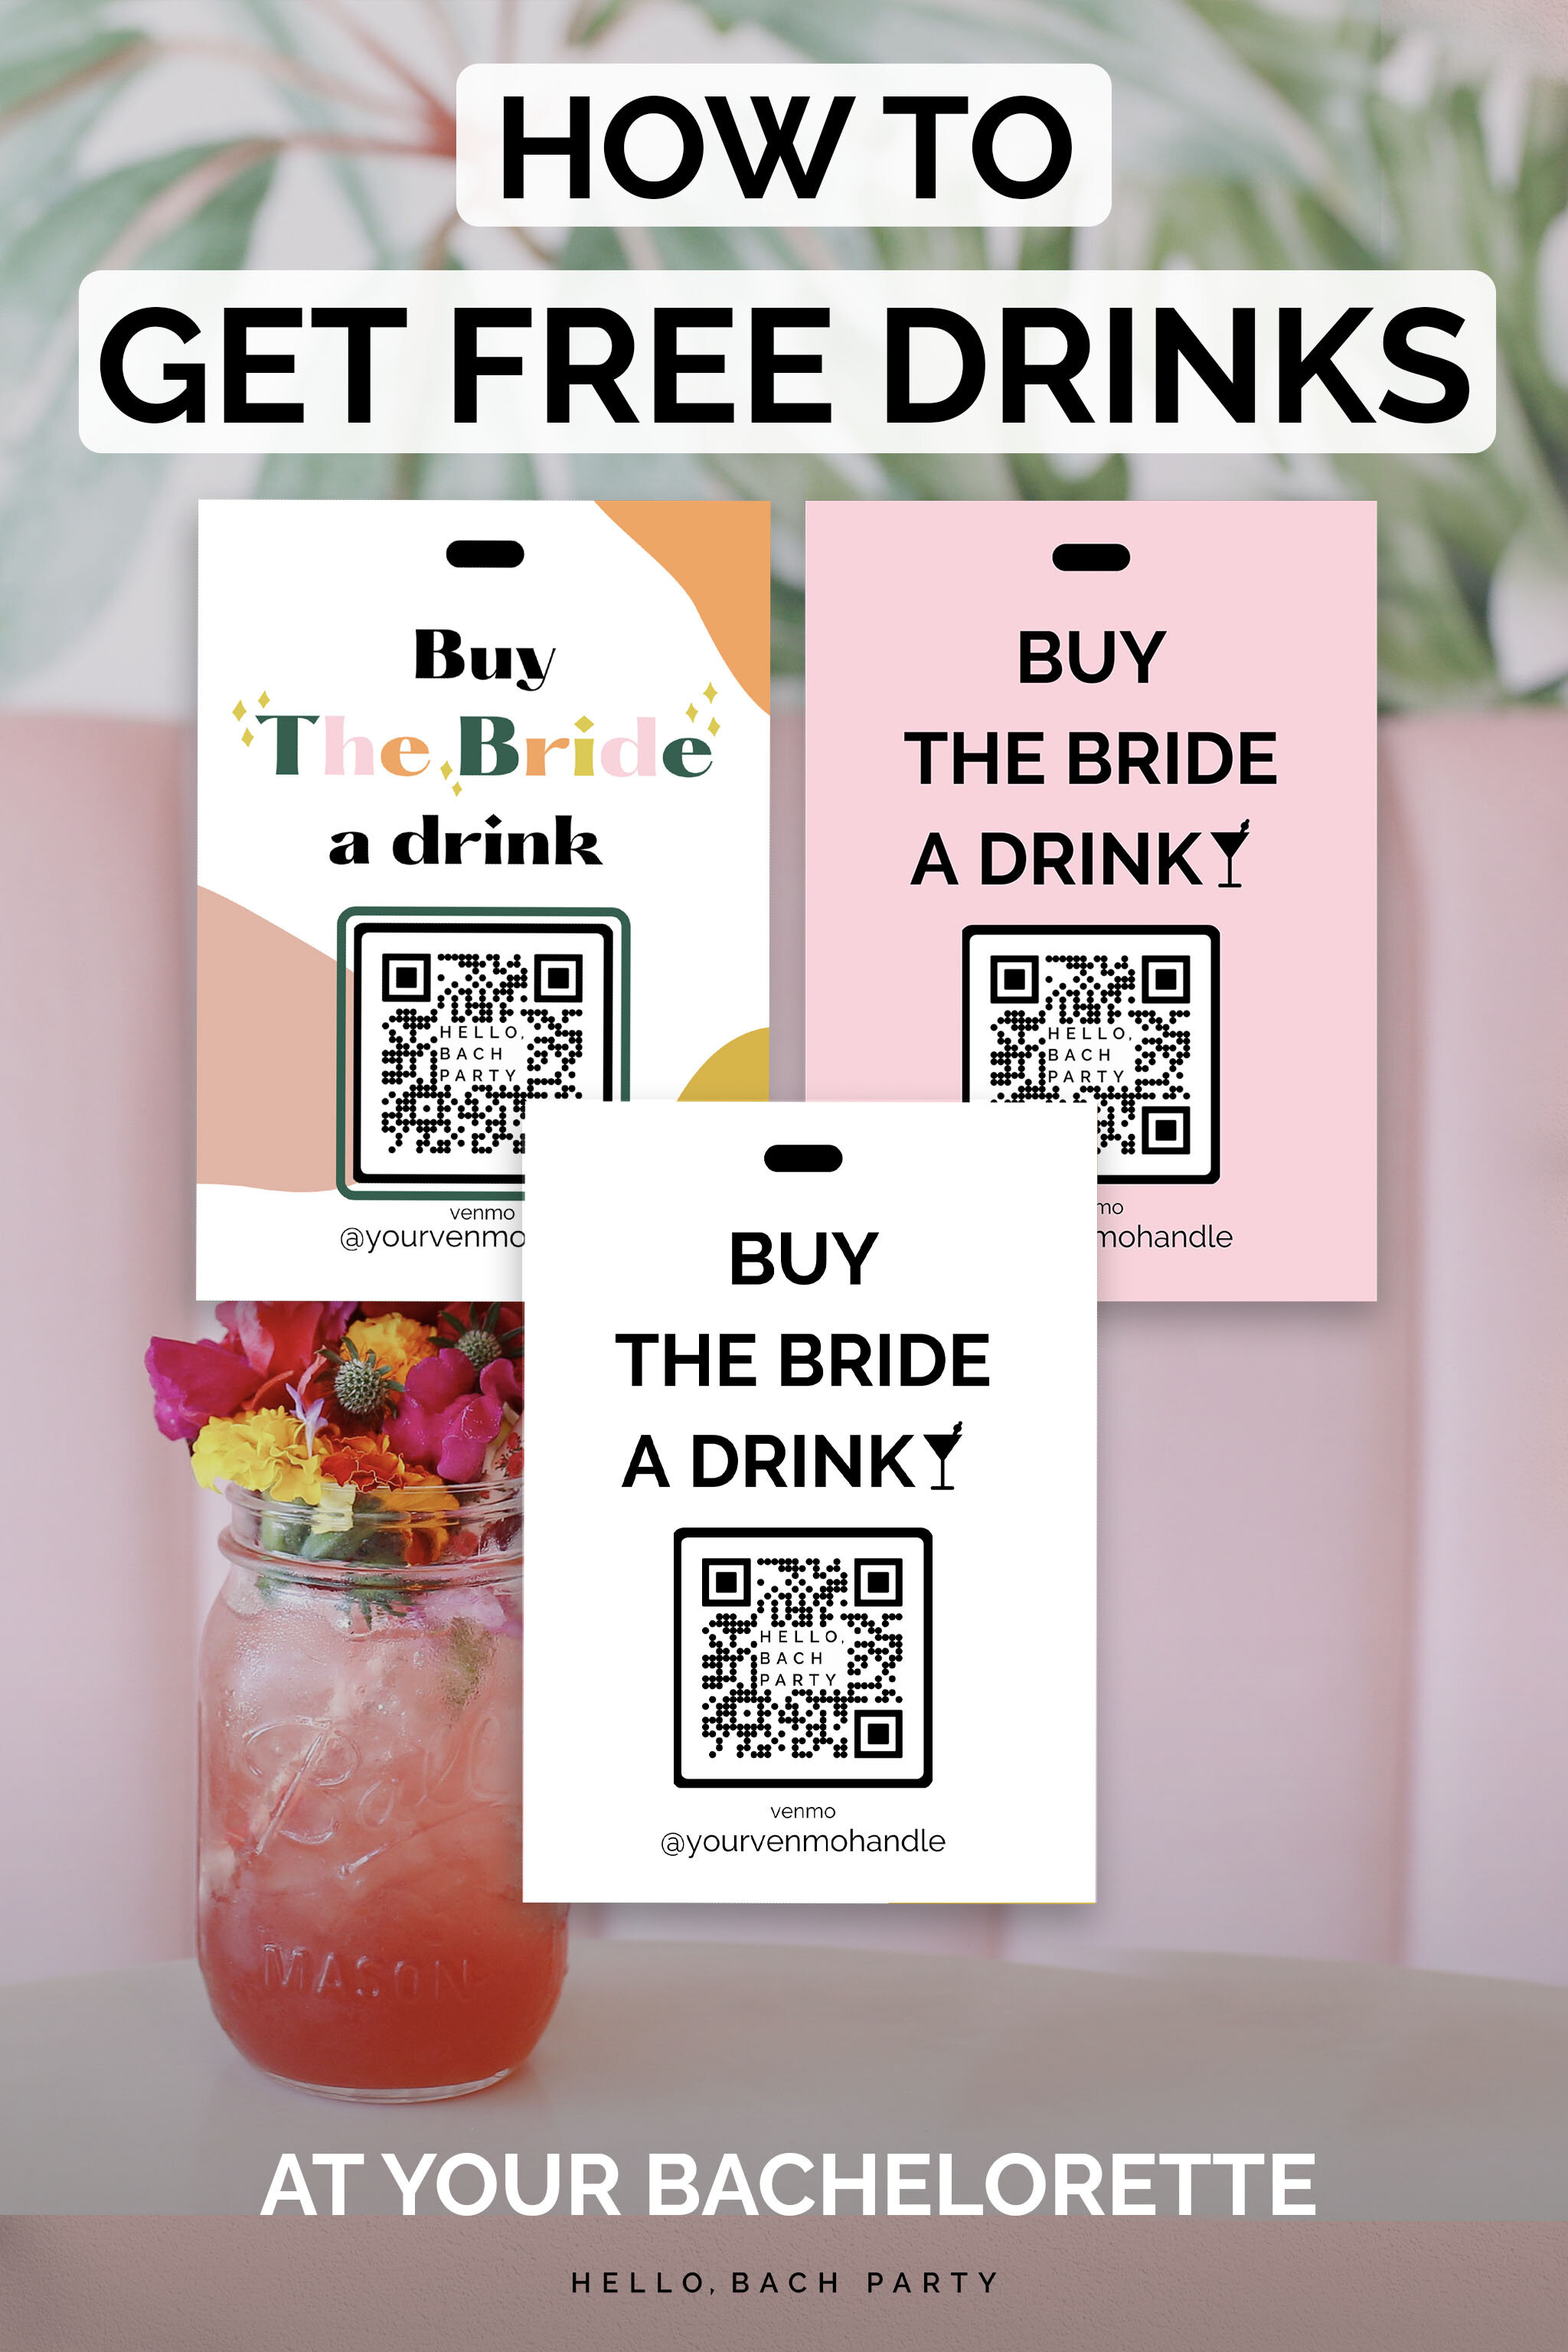 Crowdfund Drinks for Your Bachelorette Using Venmo | Hello, Bach Party